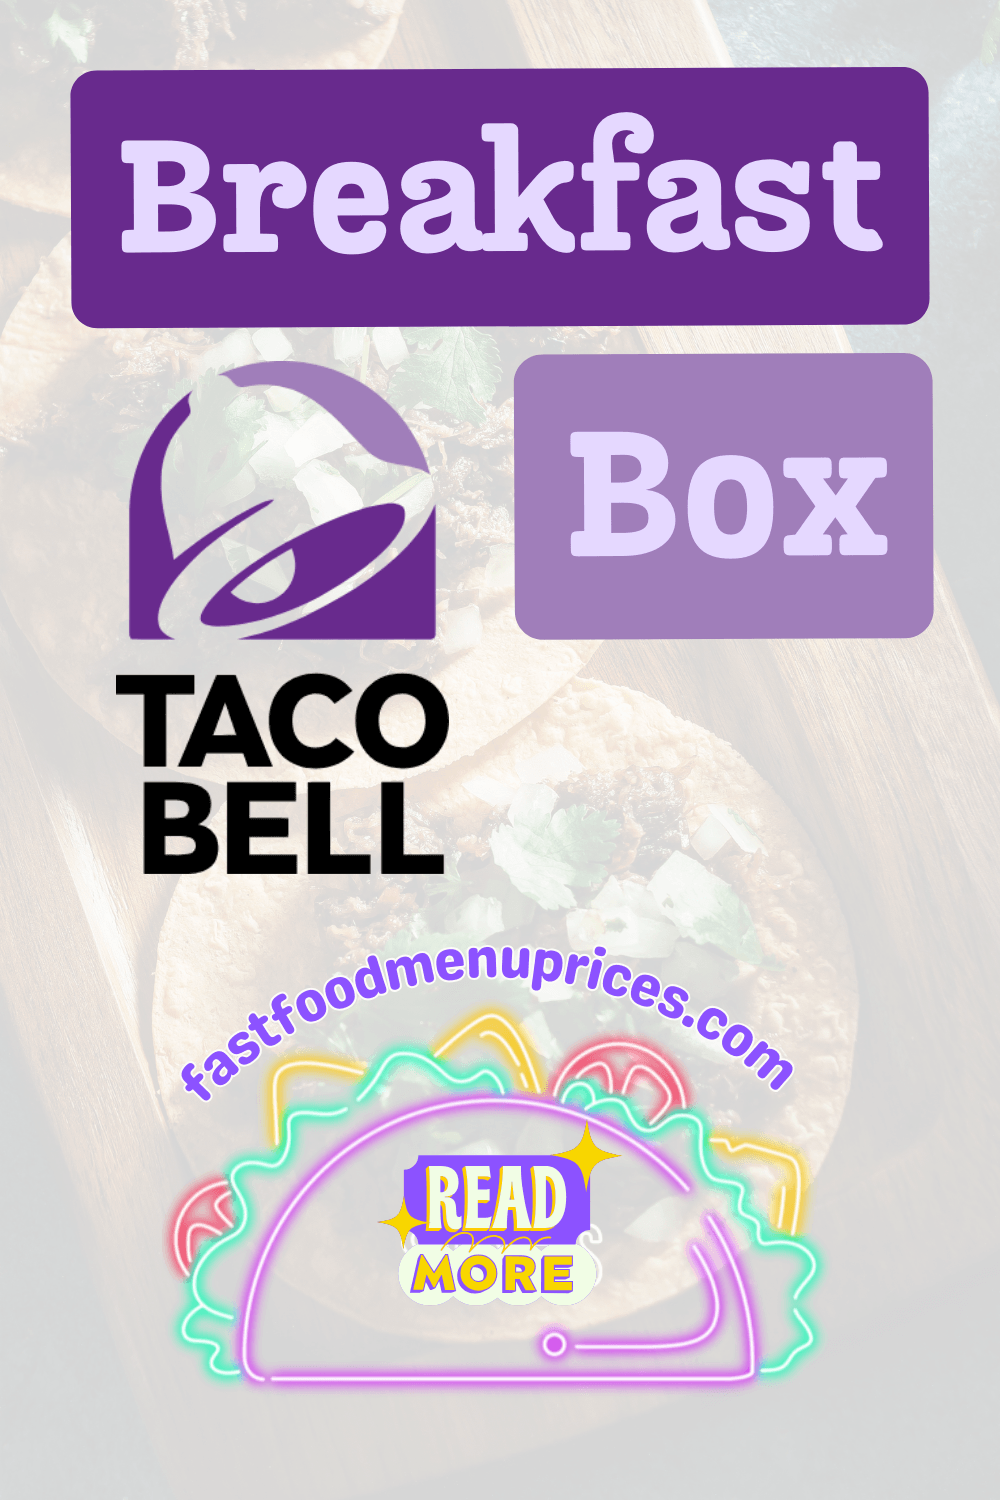 Taco Bell breakfast box with a secret menu option from Raising Cane's.